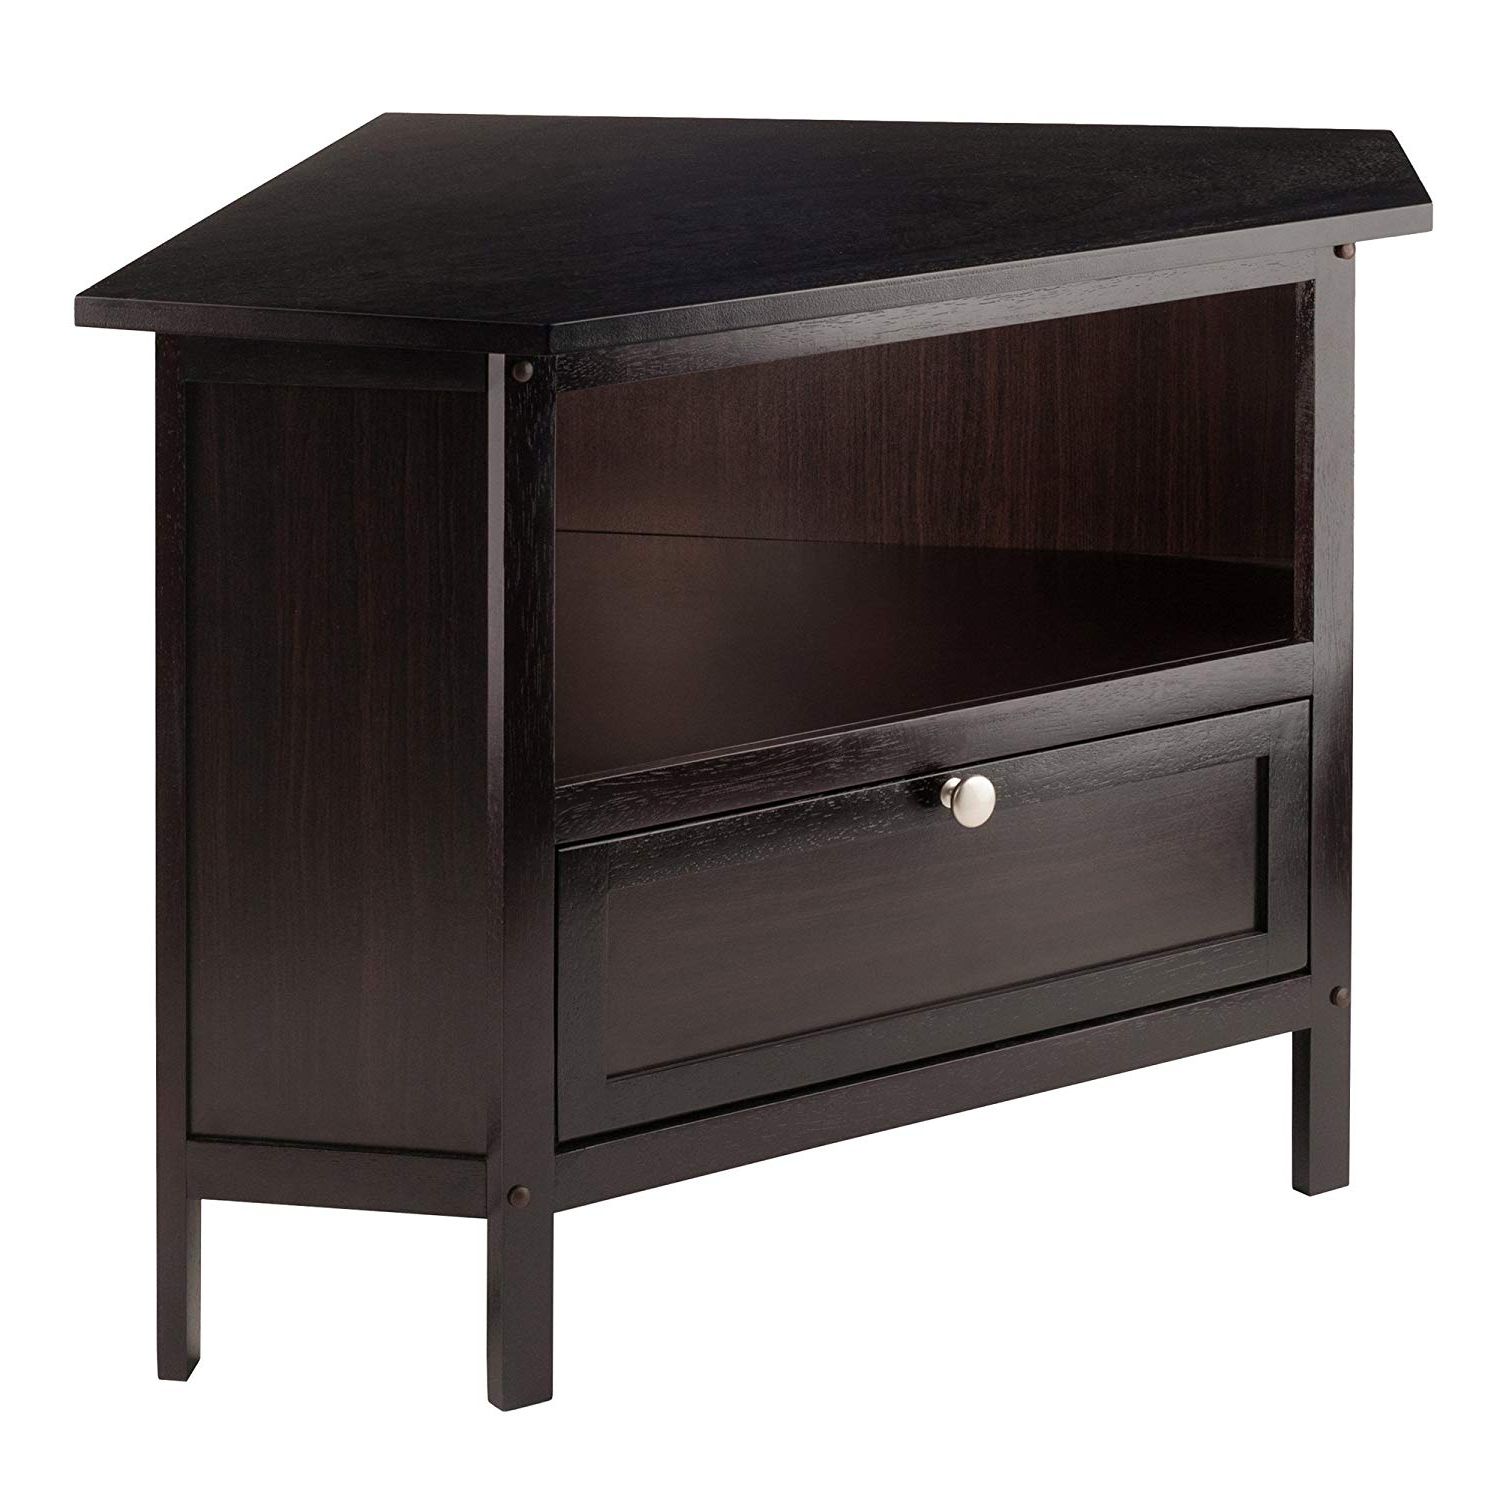 2017 Amazon: Winsome Wood 92634 Ww Zena Media/entertainment, Espresso Intended For Compact Corner Tv Stands (Photo 5 of 20)